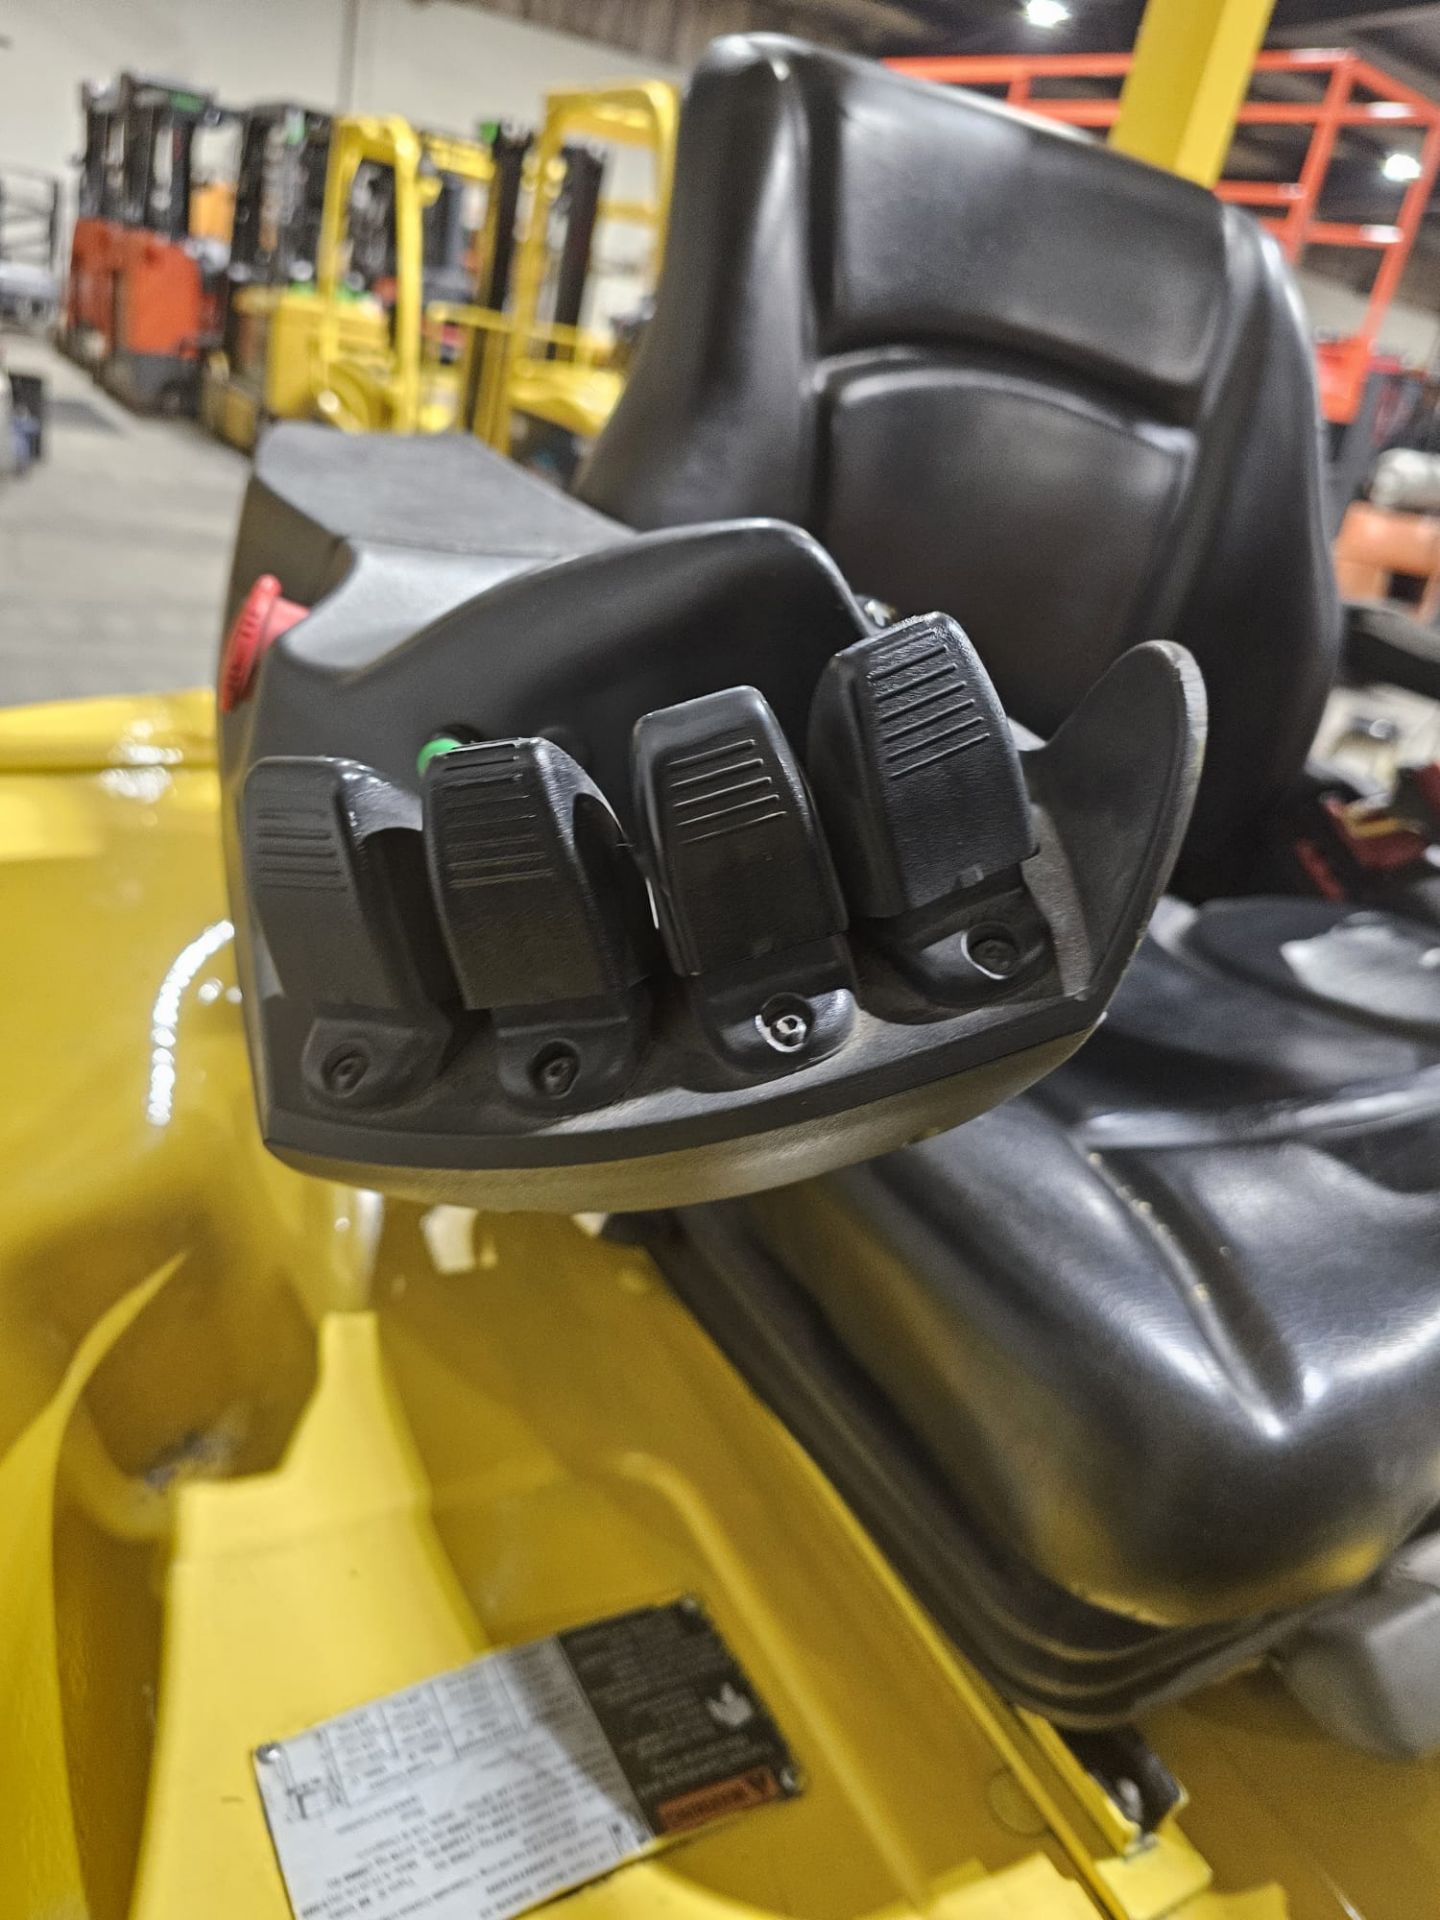 2015 Hyster 4,500lbs Capacity Forklift Electric 48V with sideshift & 3-STAGE MAST 189" load height - Image 2 of 7